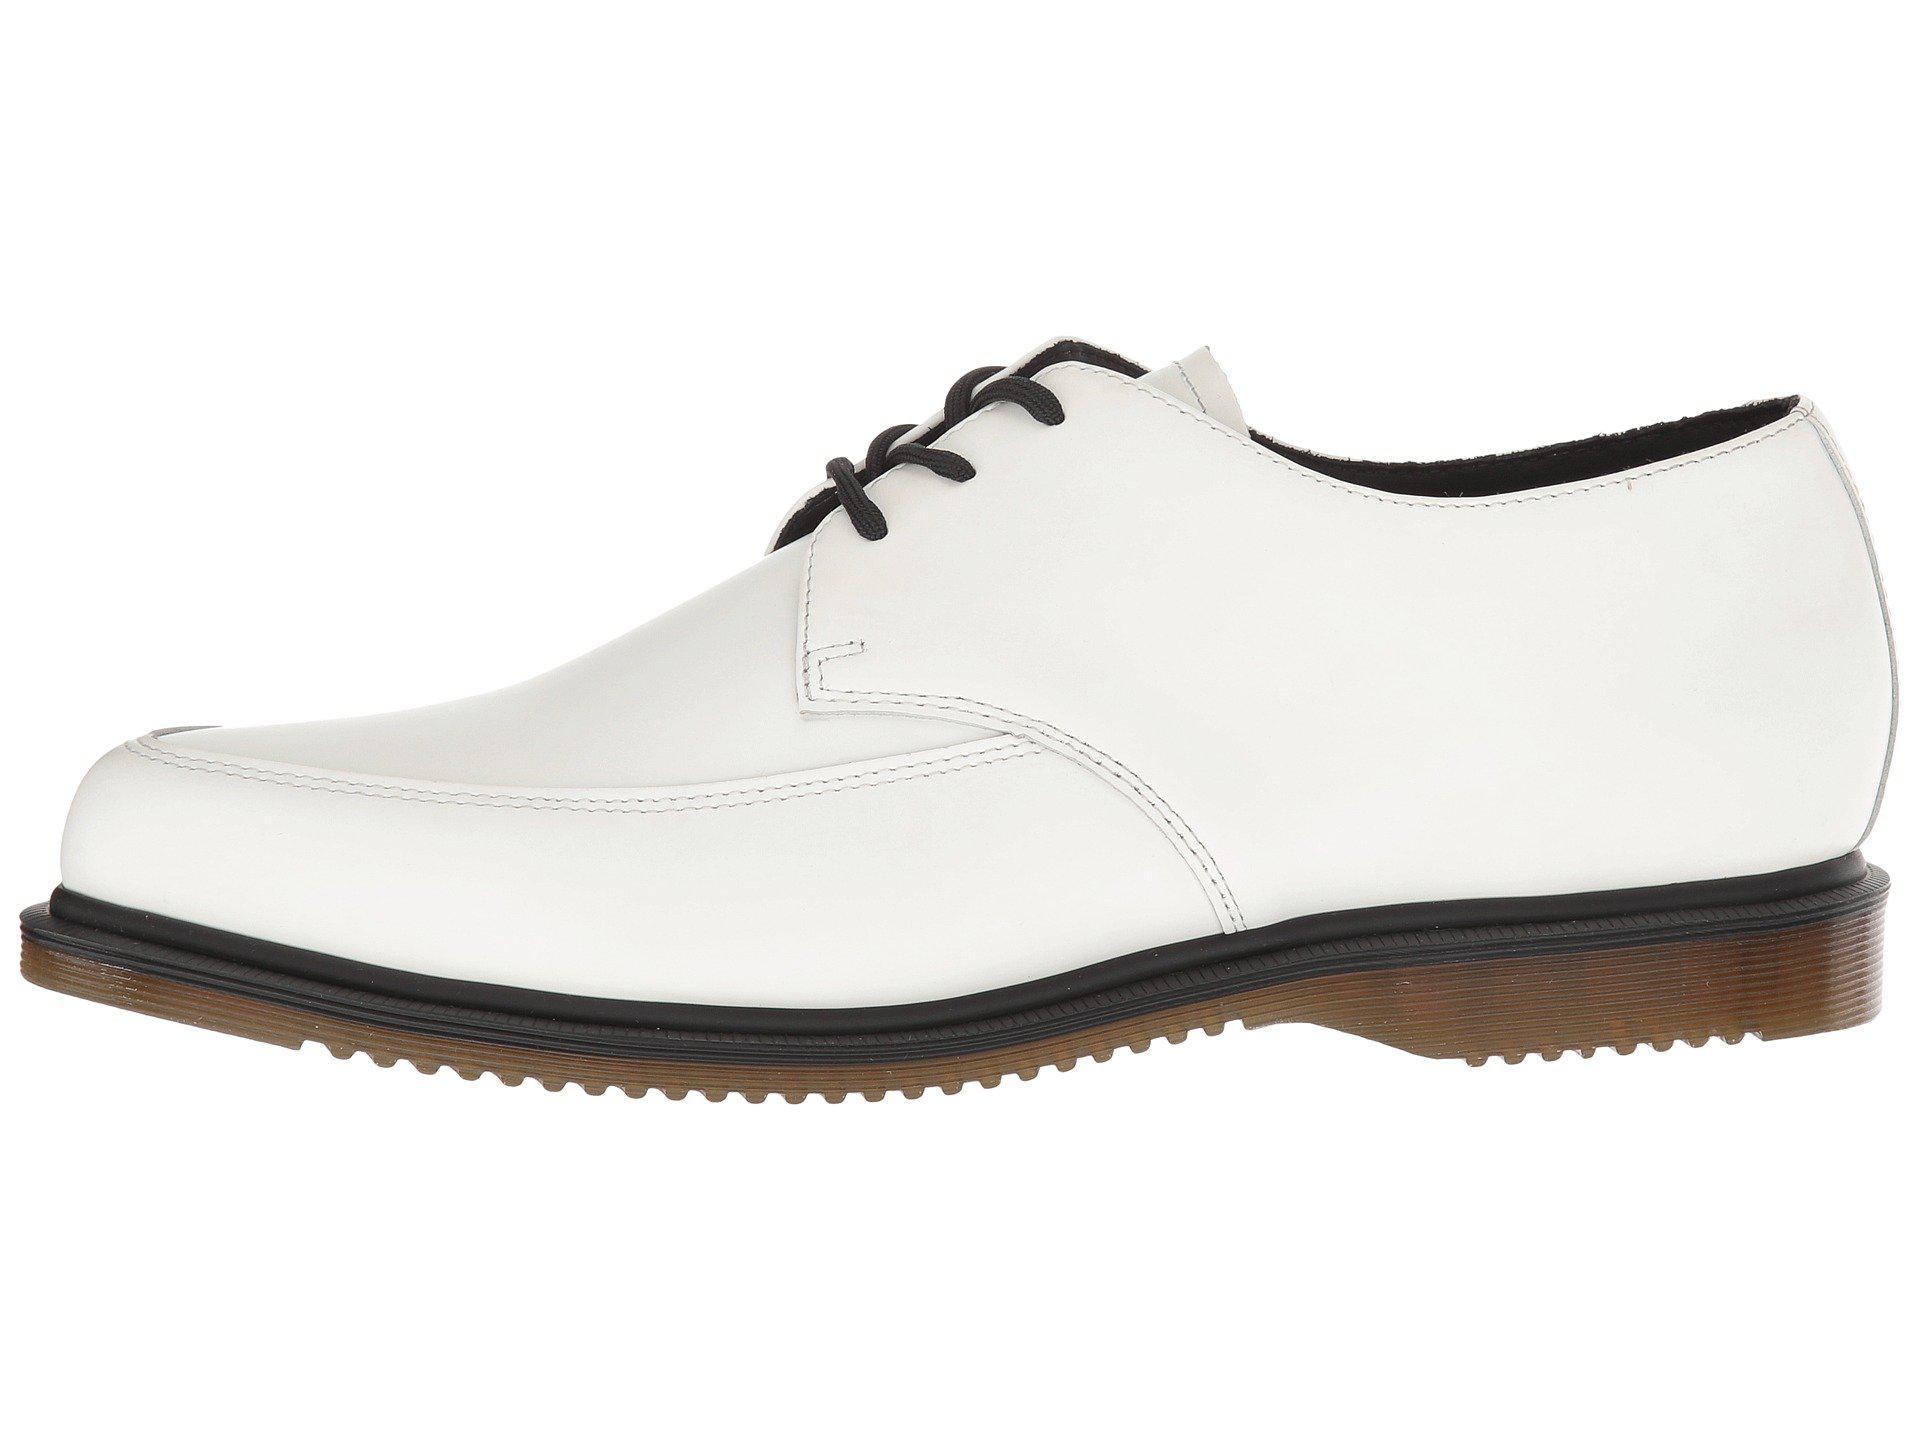 Dr. Martens Leather Willis Creeper (white Smooth) Shoes for Men - Lyst